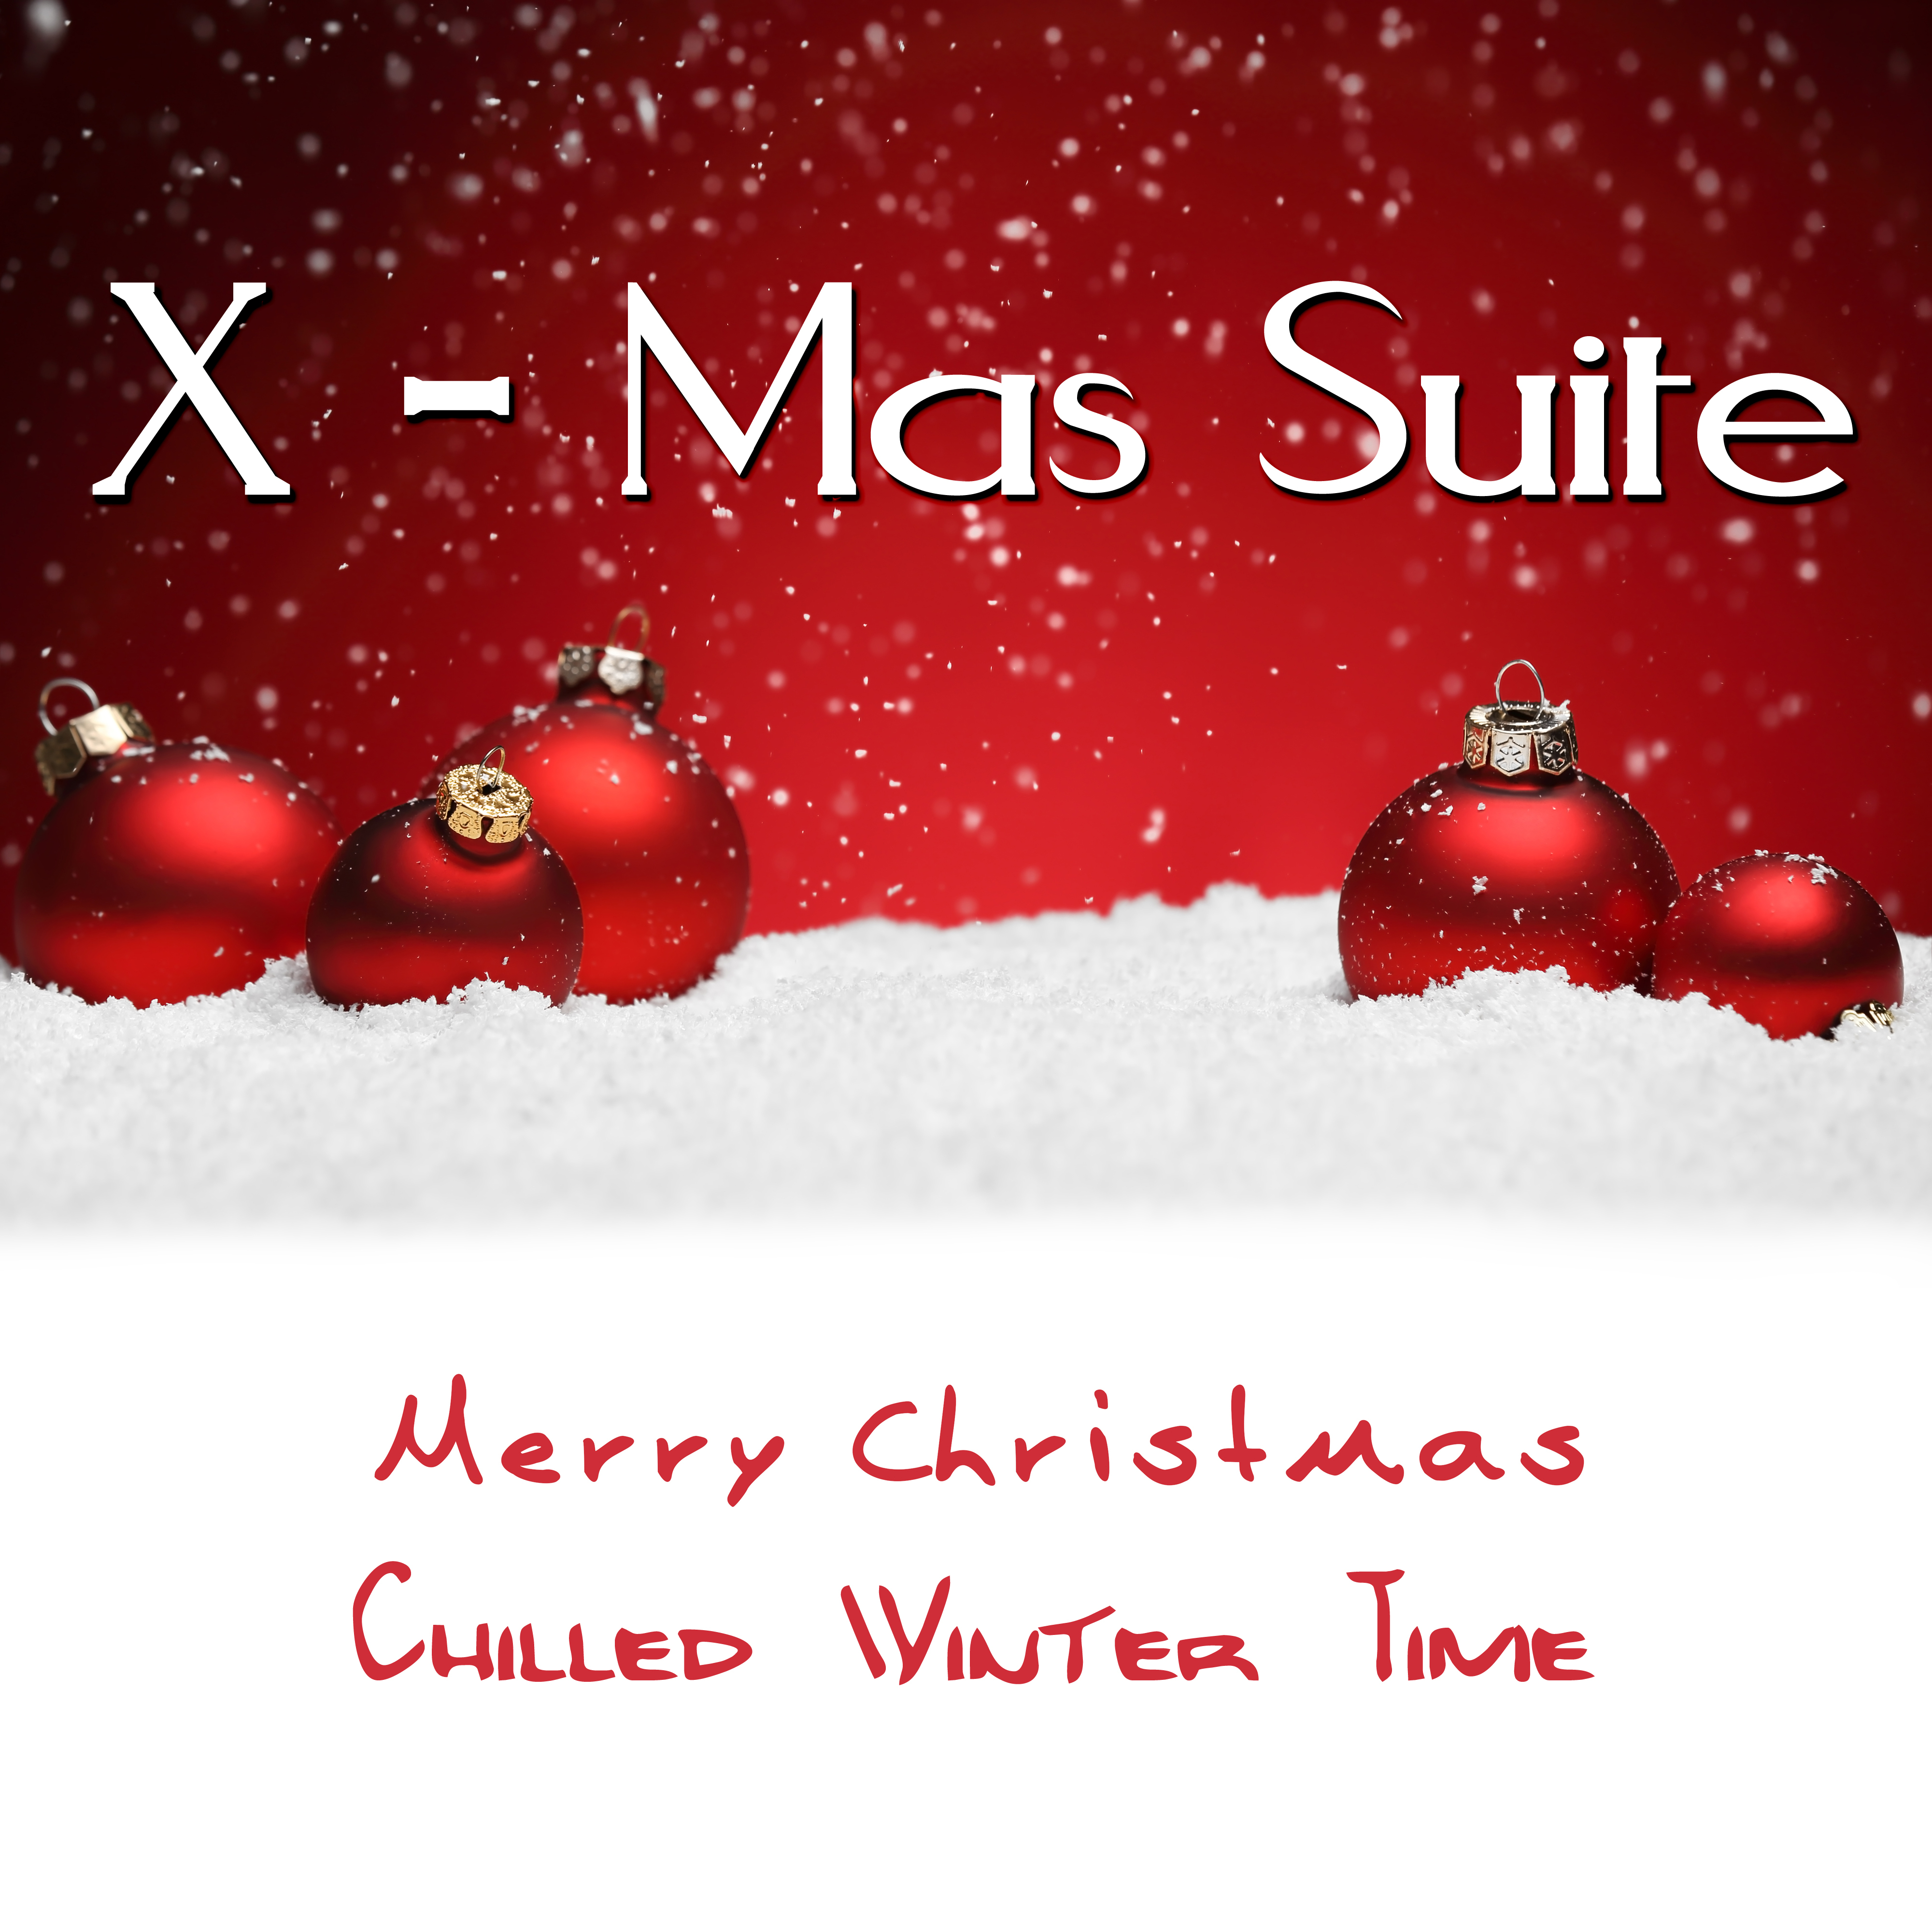 X - Mas Suite - Merry Christmas - Chilled Winter Time